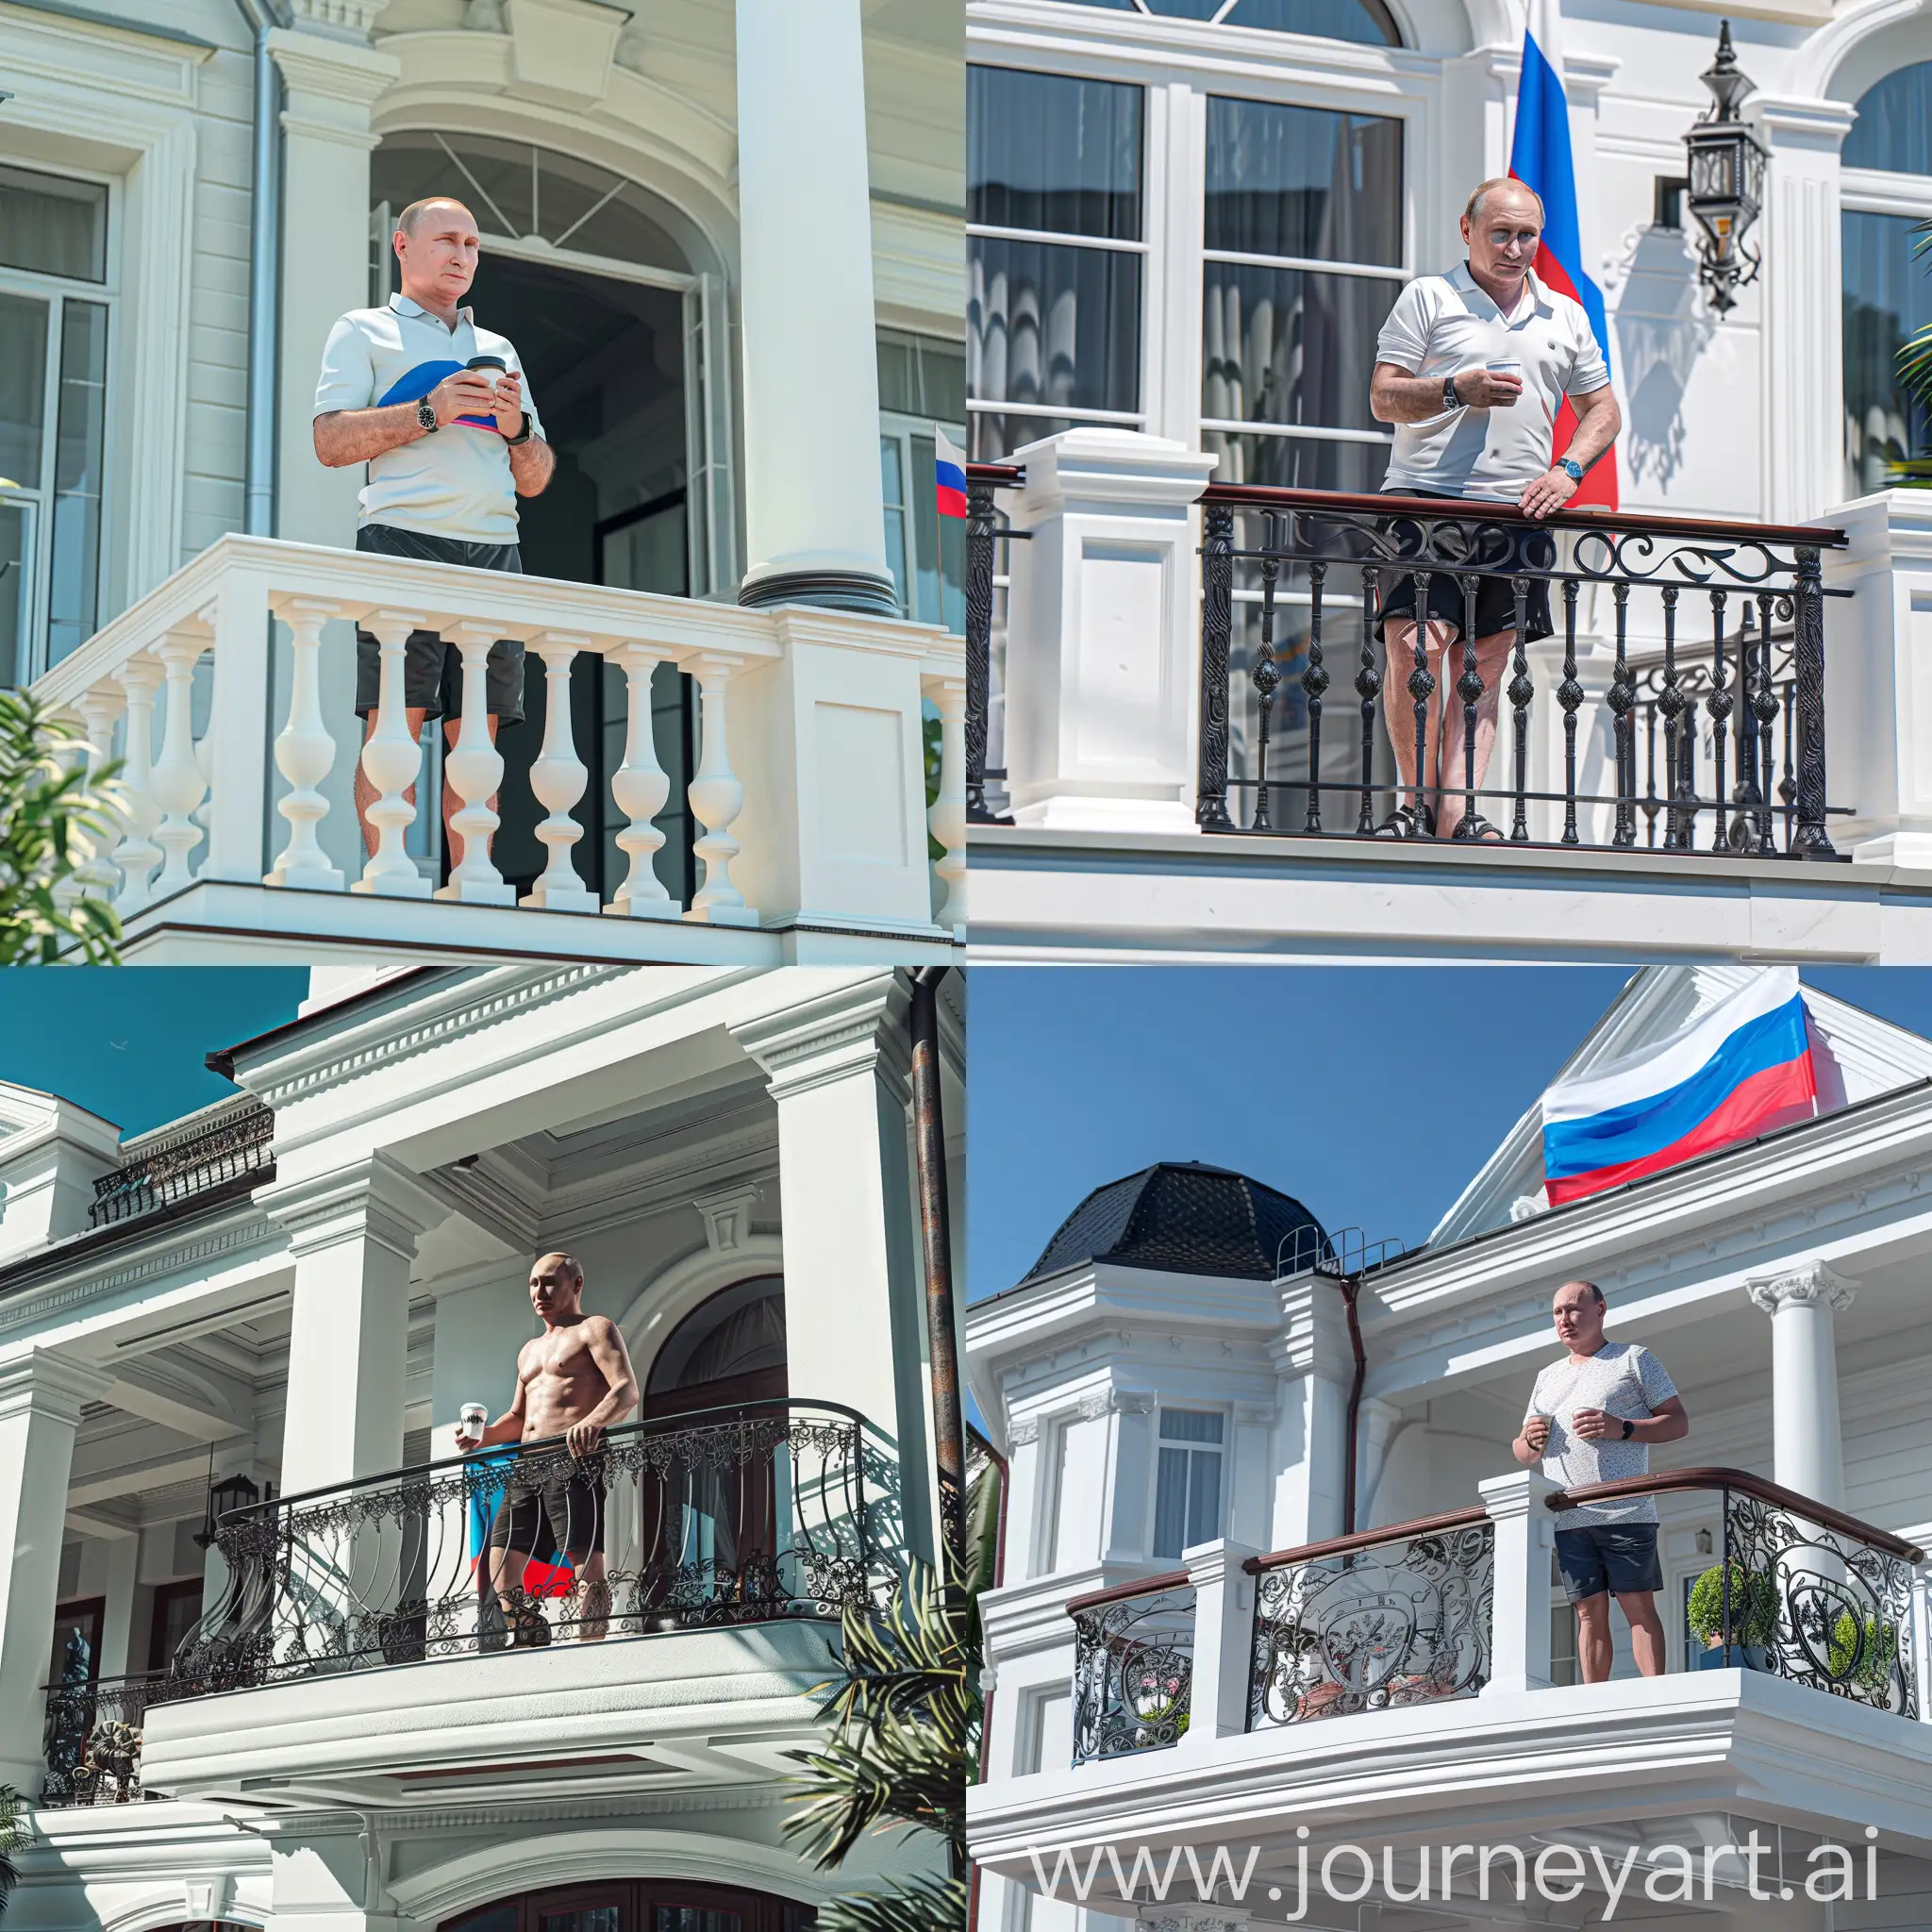 Vladimir-Putin-Standing-on-Balcony-of-White-Mansion-with-Coffee-Cup-in-Hand-and-Russian-Flag-Background